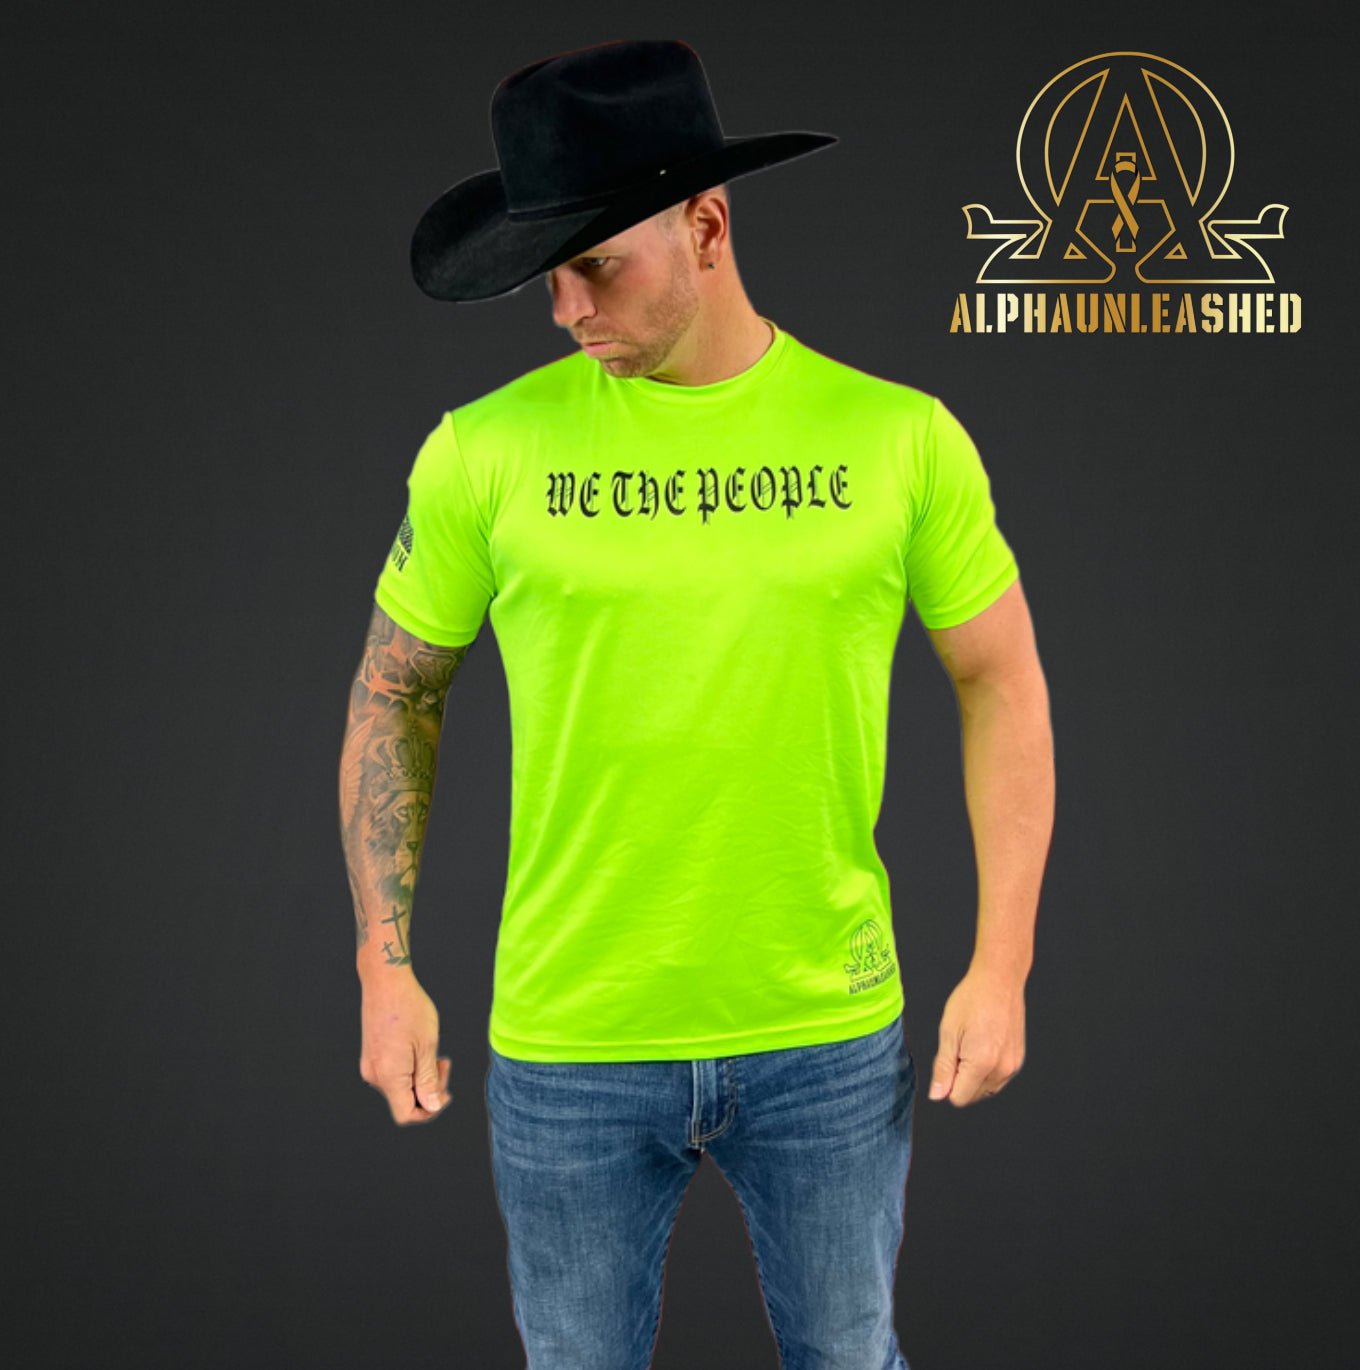 MEN’S WE THE PEOPLE DRY-FIT TEE | WE THE PEOPLE HIGH-VISIBILITY SHIRT - NEON GREEN | ALPHAUNLEASHED - ALPHAunleashed